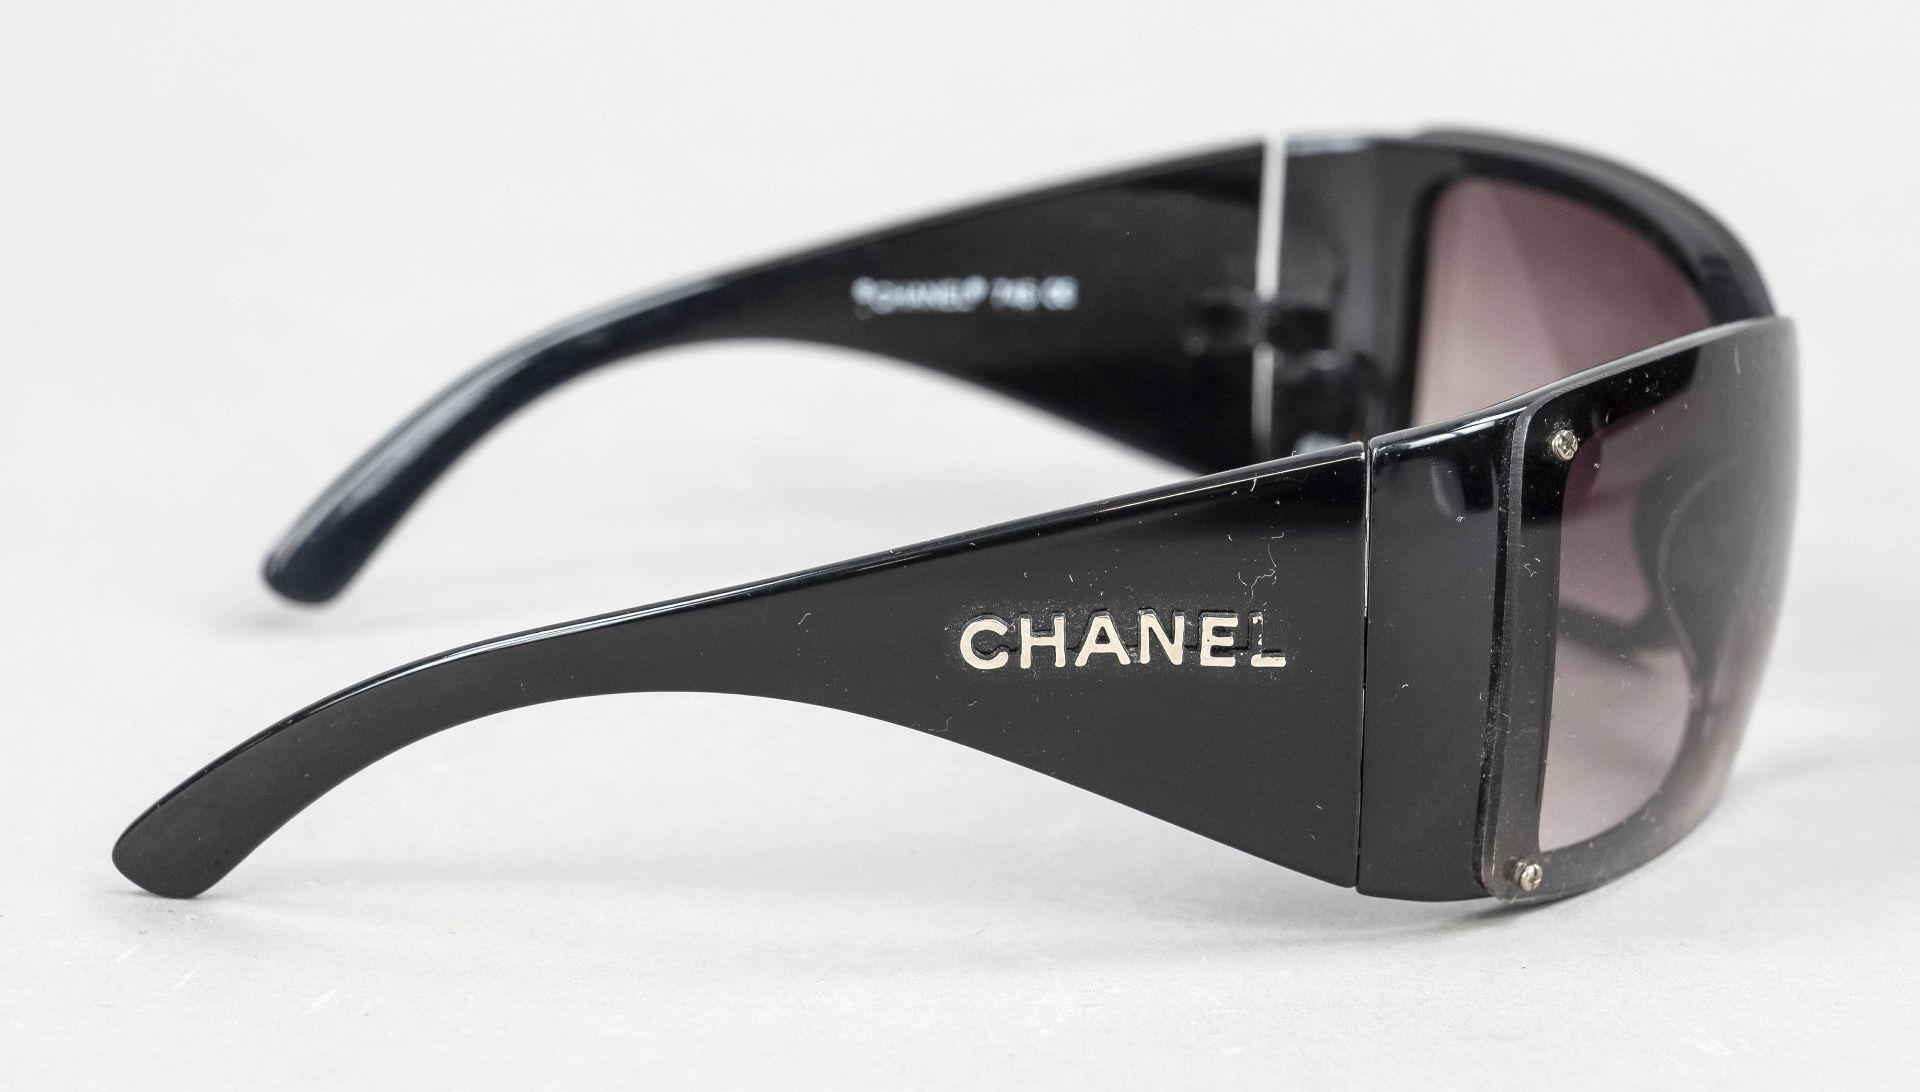 Chanel, sunglasses, black plastic frame with wide temples and logo applied to the side, brown tinted - Image 2 of 2